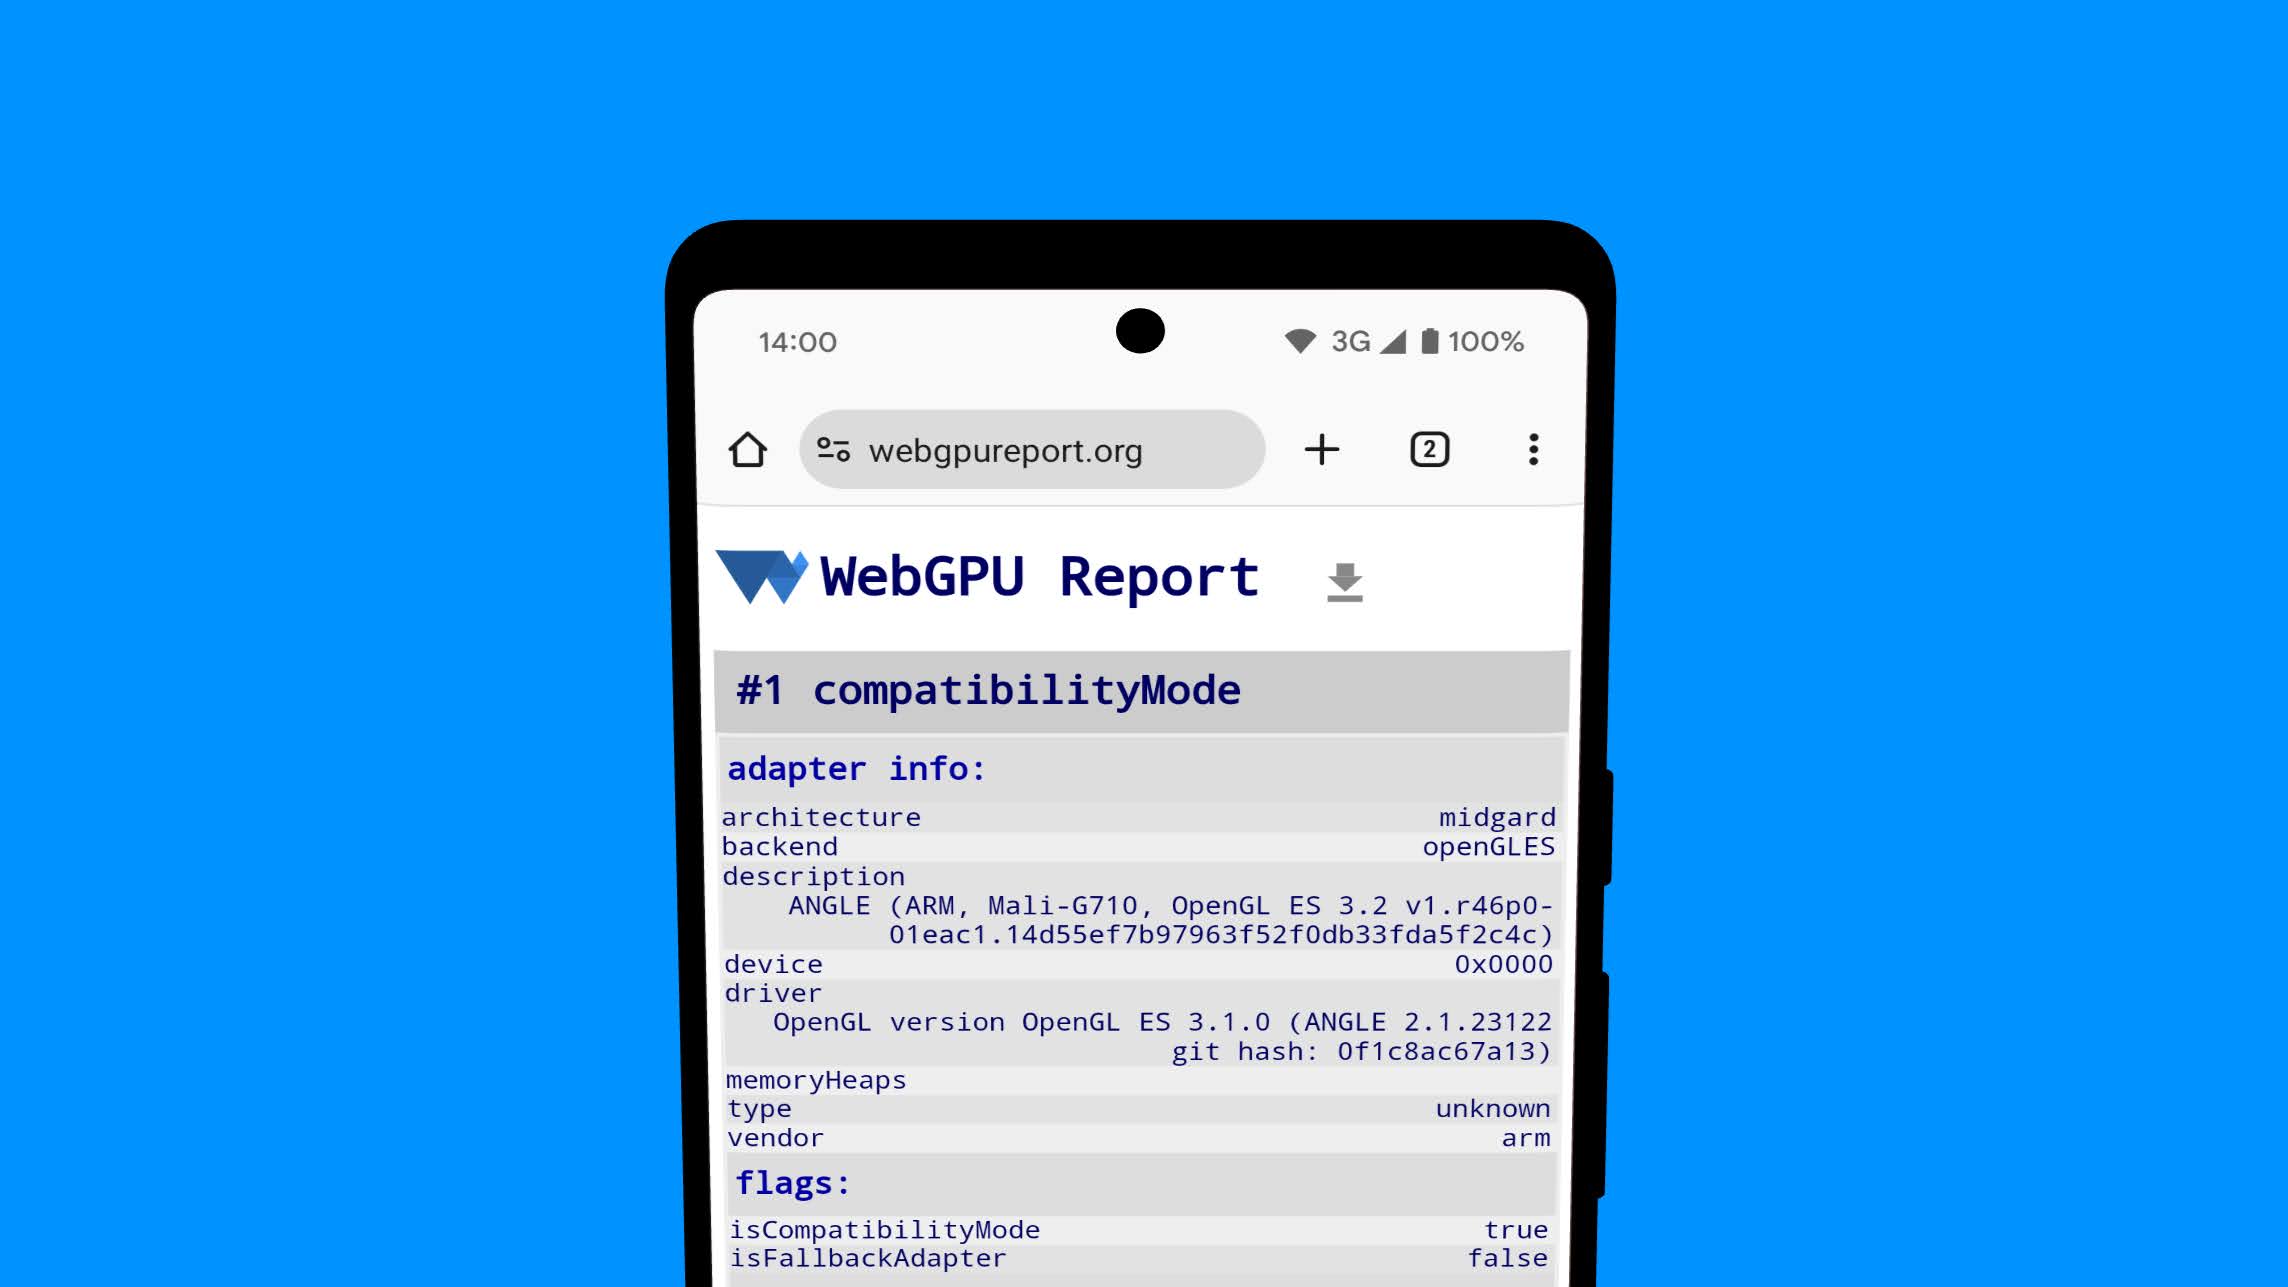 WebGPU report page shows GPUAdapter info from the OpenGL ES backend on Android device.